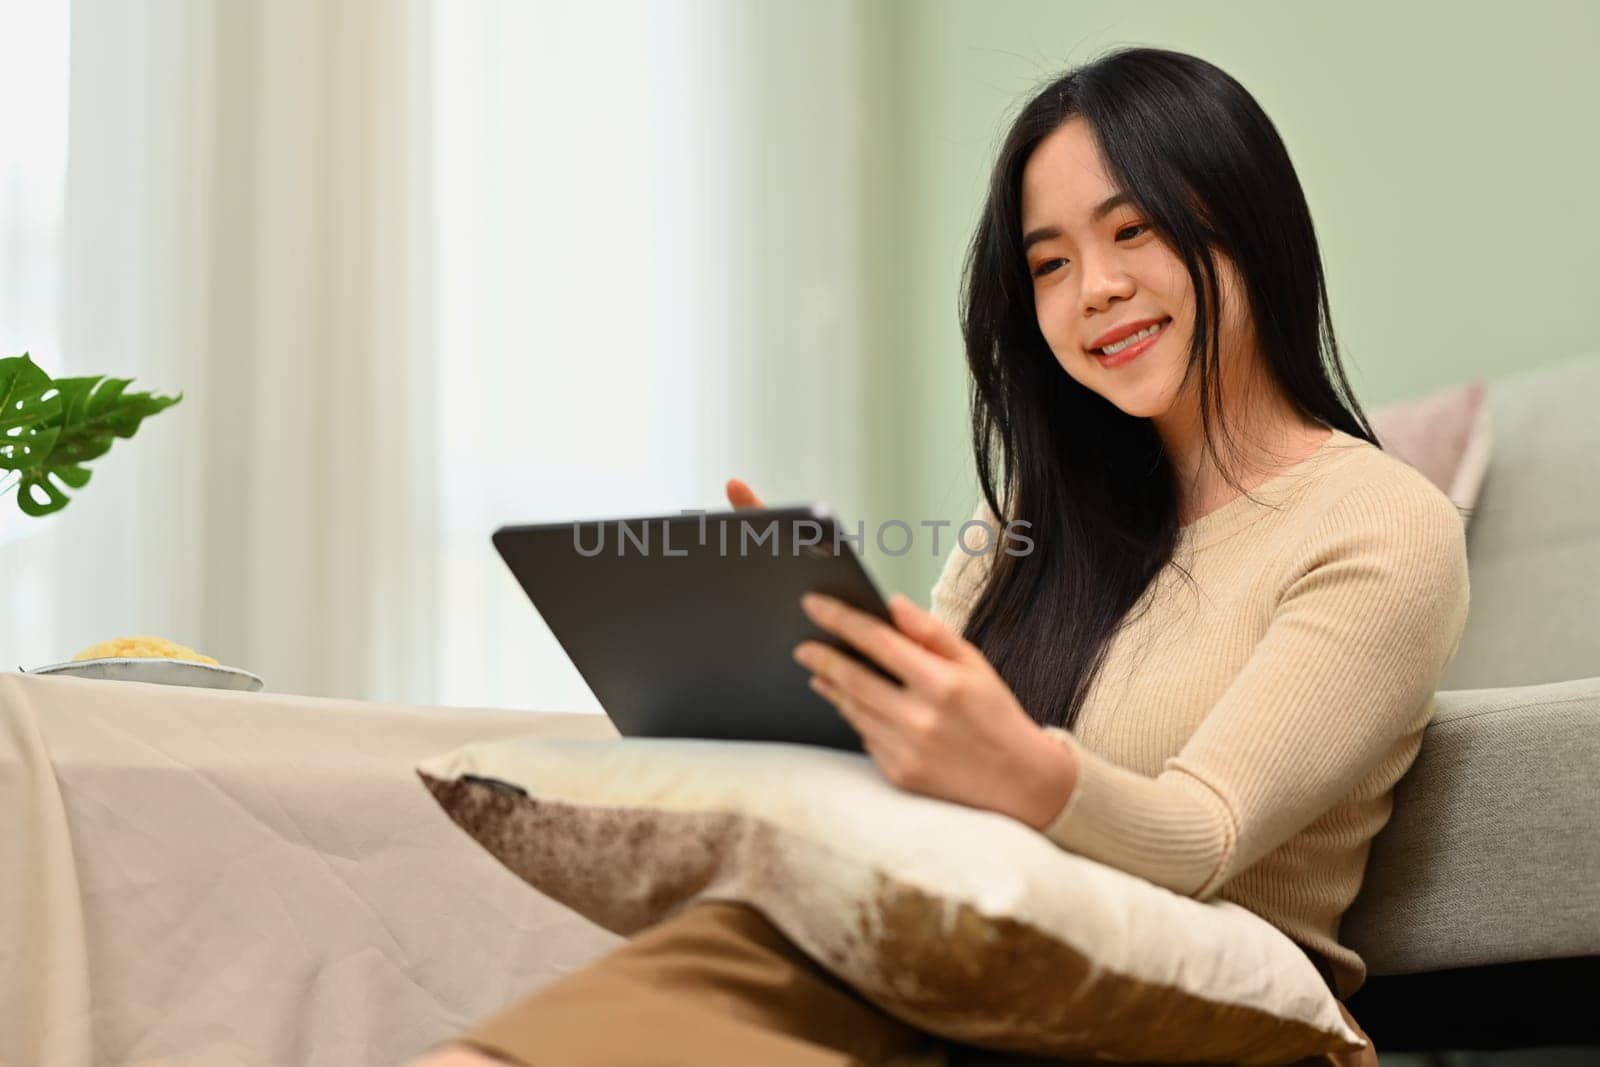 Cute, smiling young woman using digital tablet in living room. Technology, people and lifestyle concept.